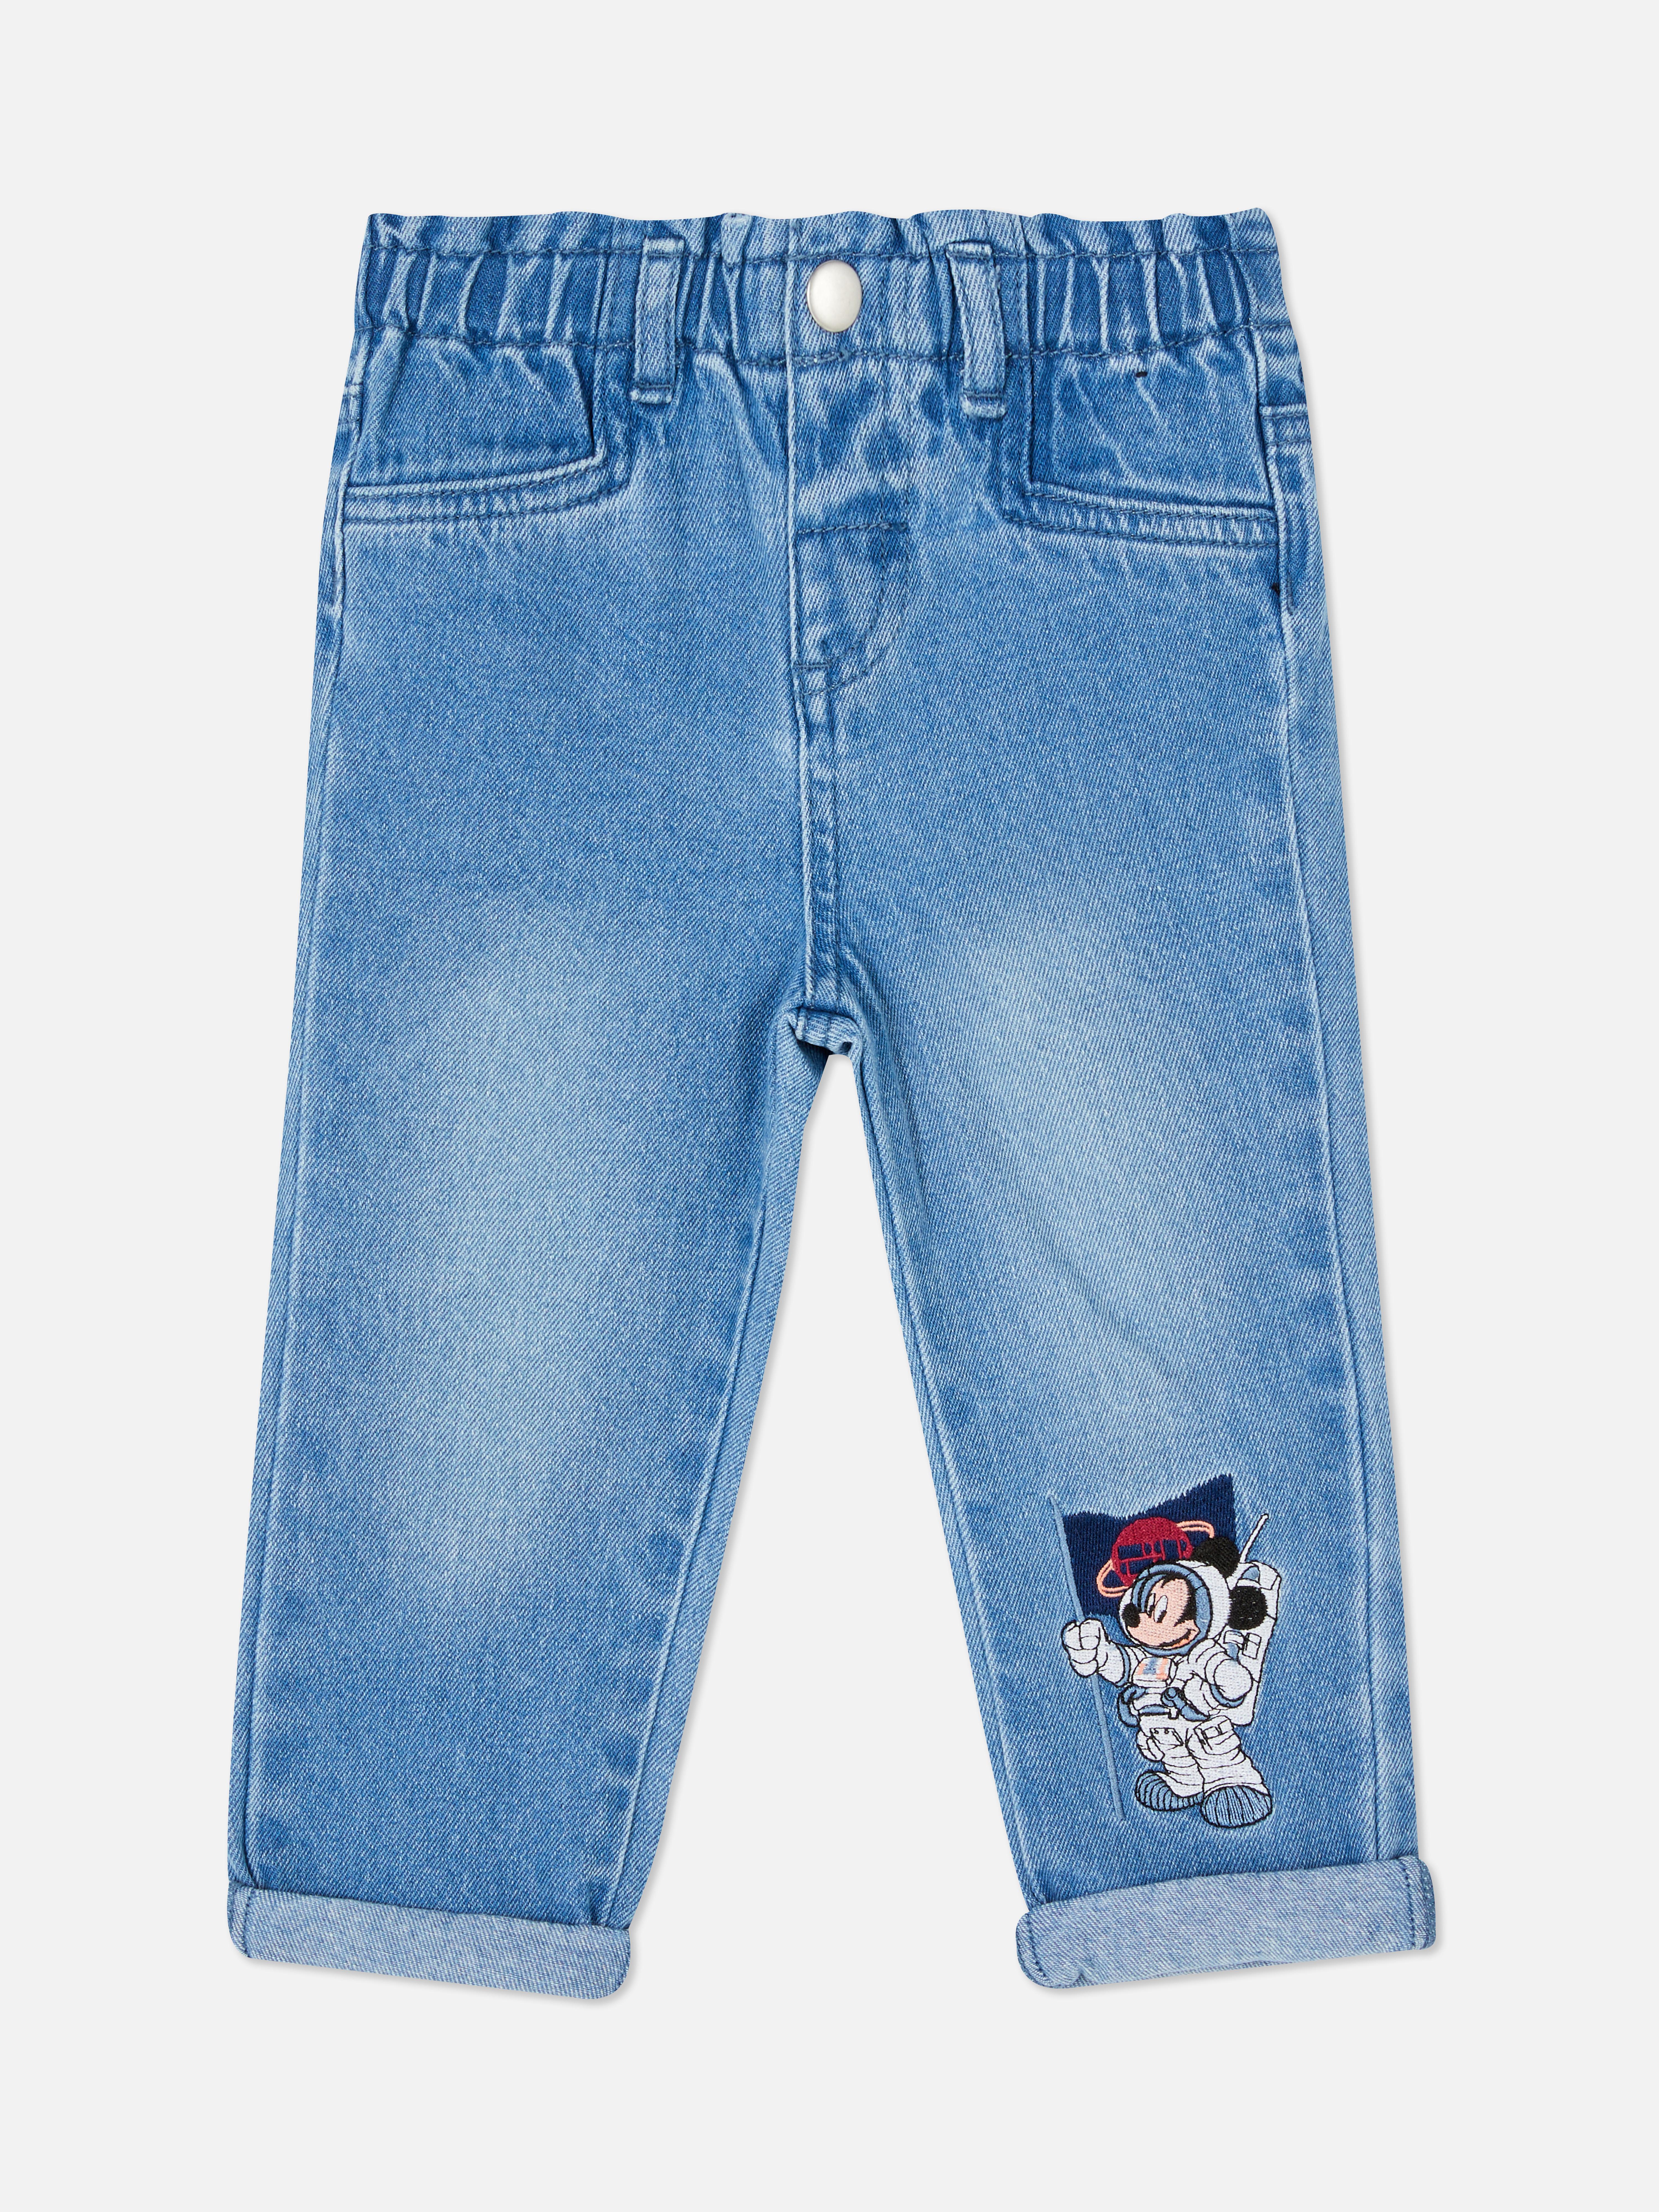 discount 77% Primark jeans KIDS FASHION Trousers Embroidery Blue 